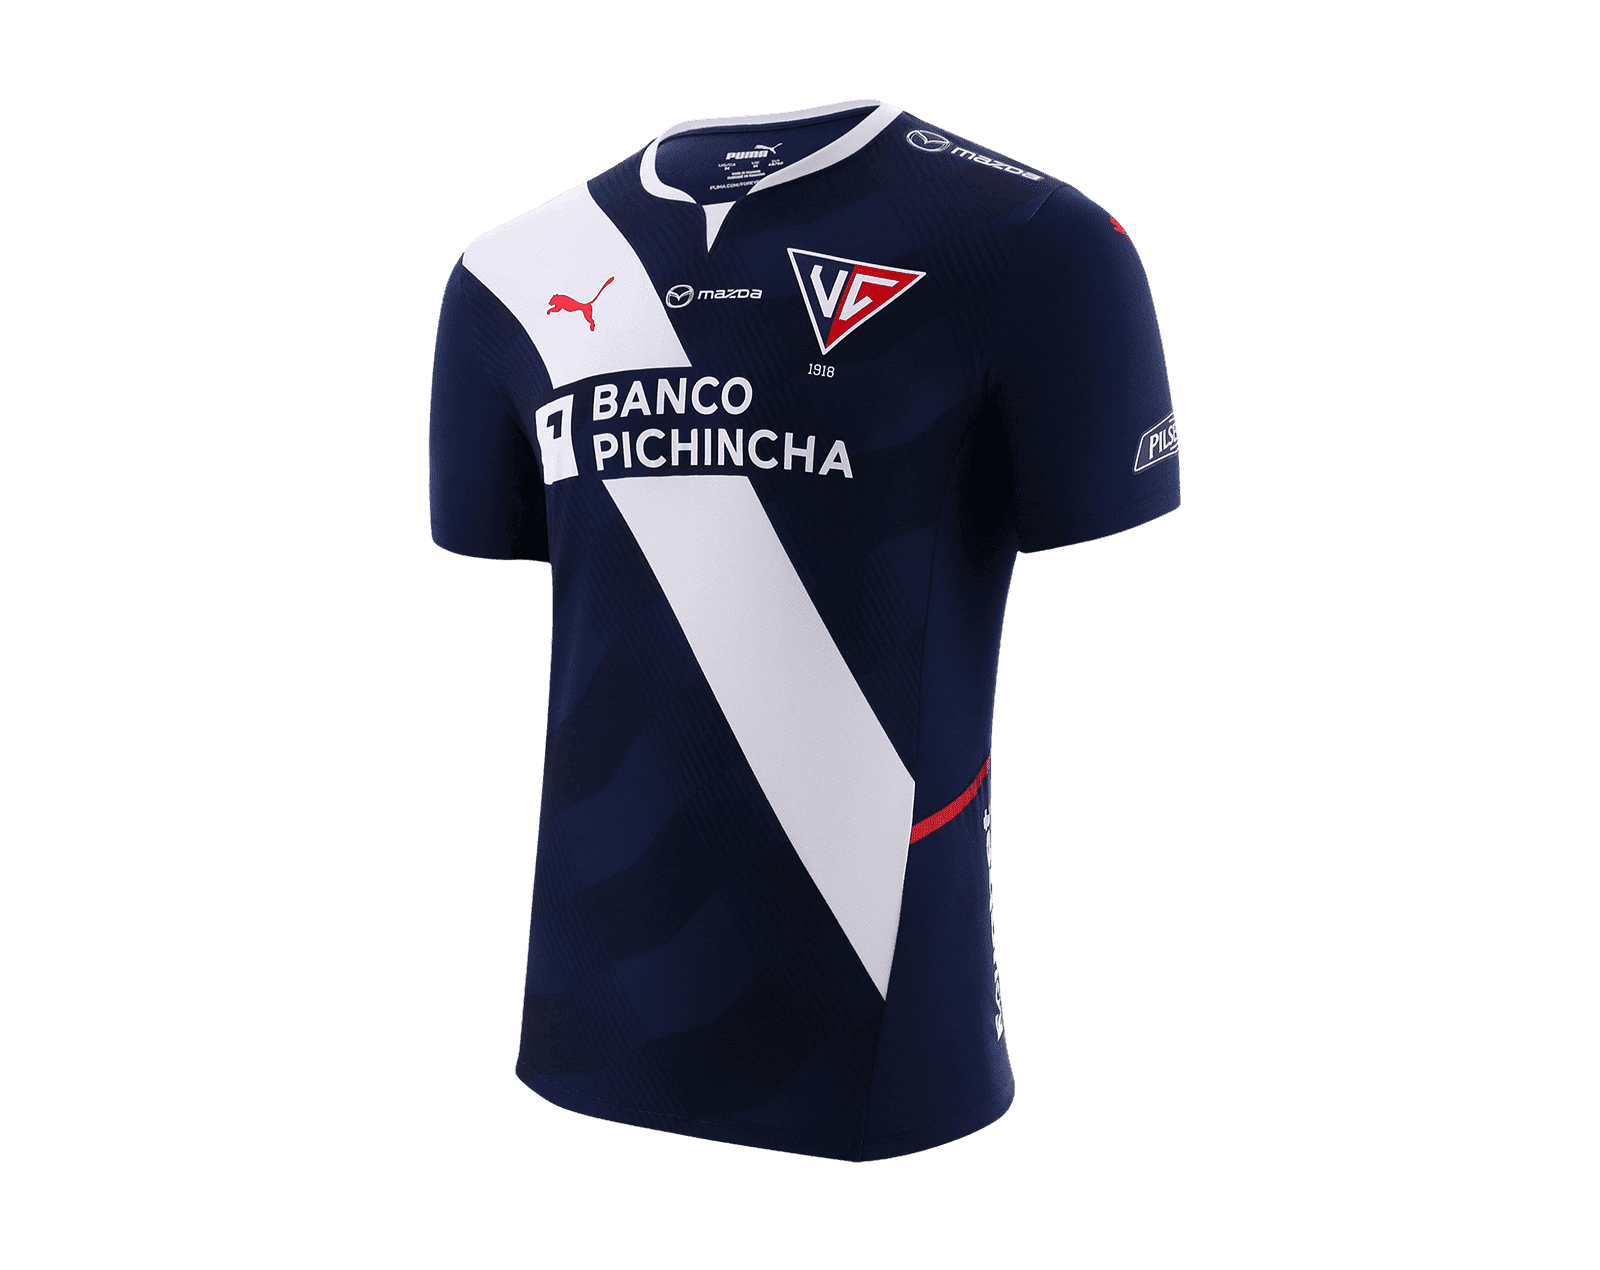 A blue jersey with white diagonal line